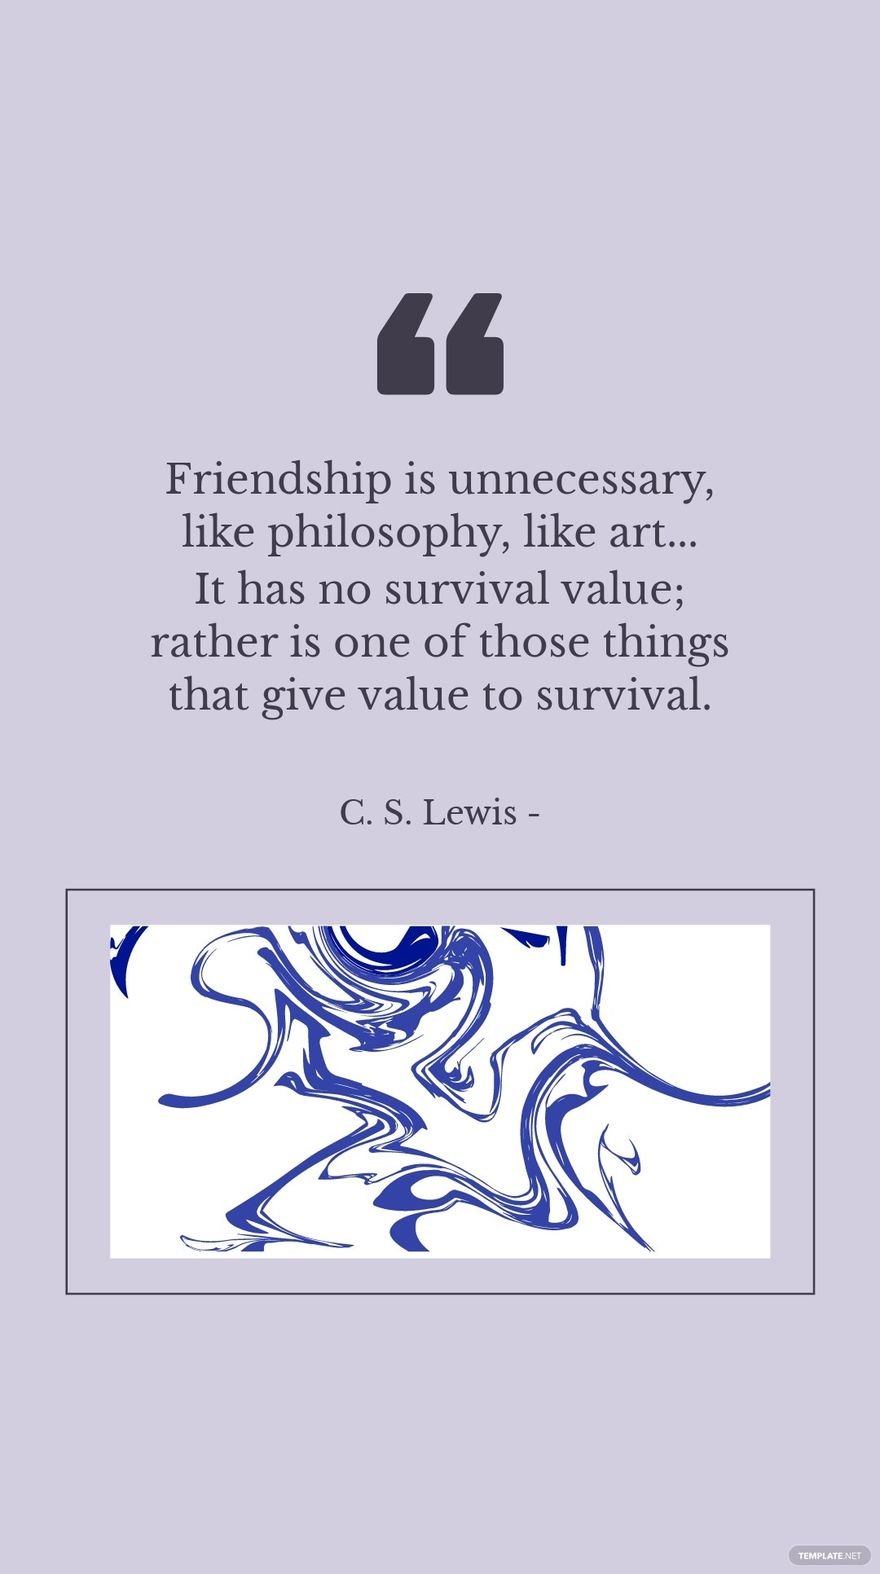 C. S. Lewis - Friendship is unnecessary, like philosophy, like art... It has no survival value; rather is one of those things that give value to survival.